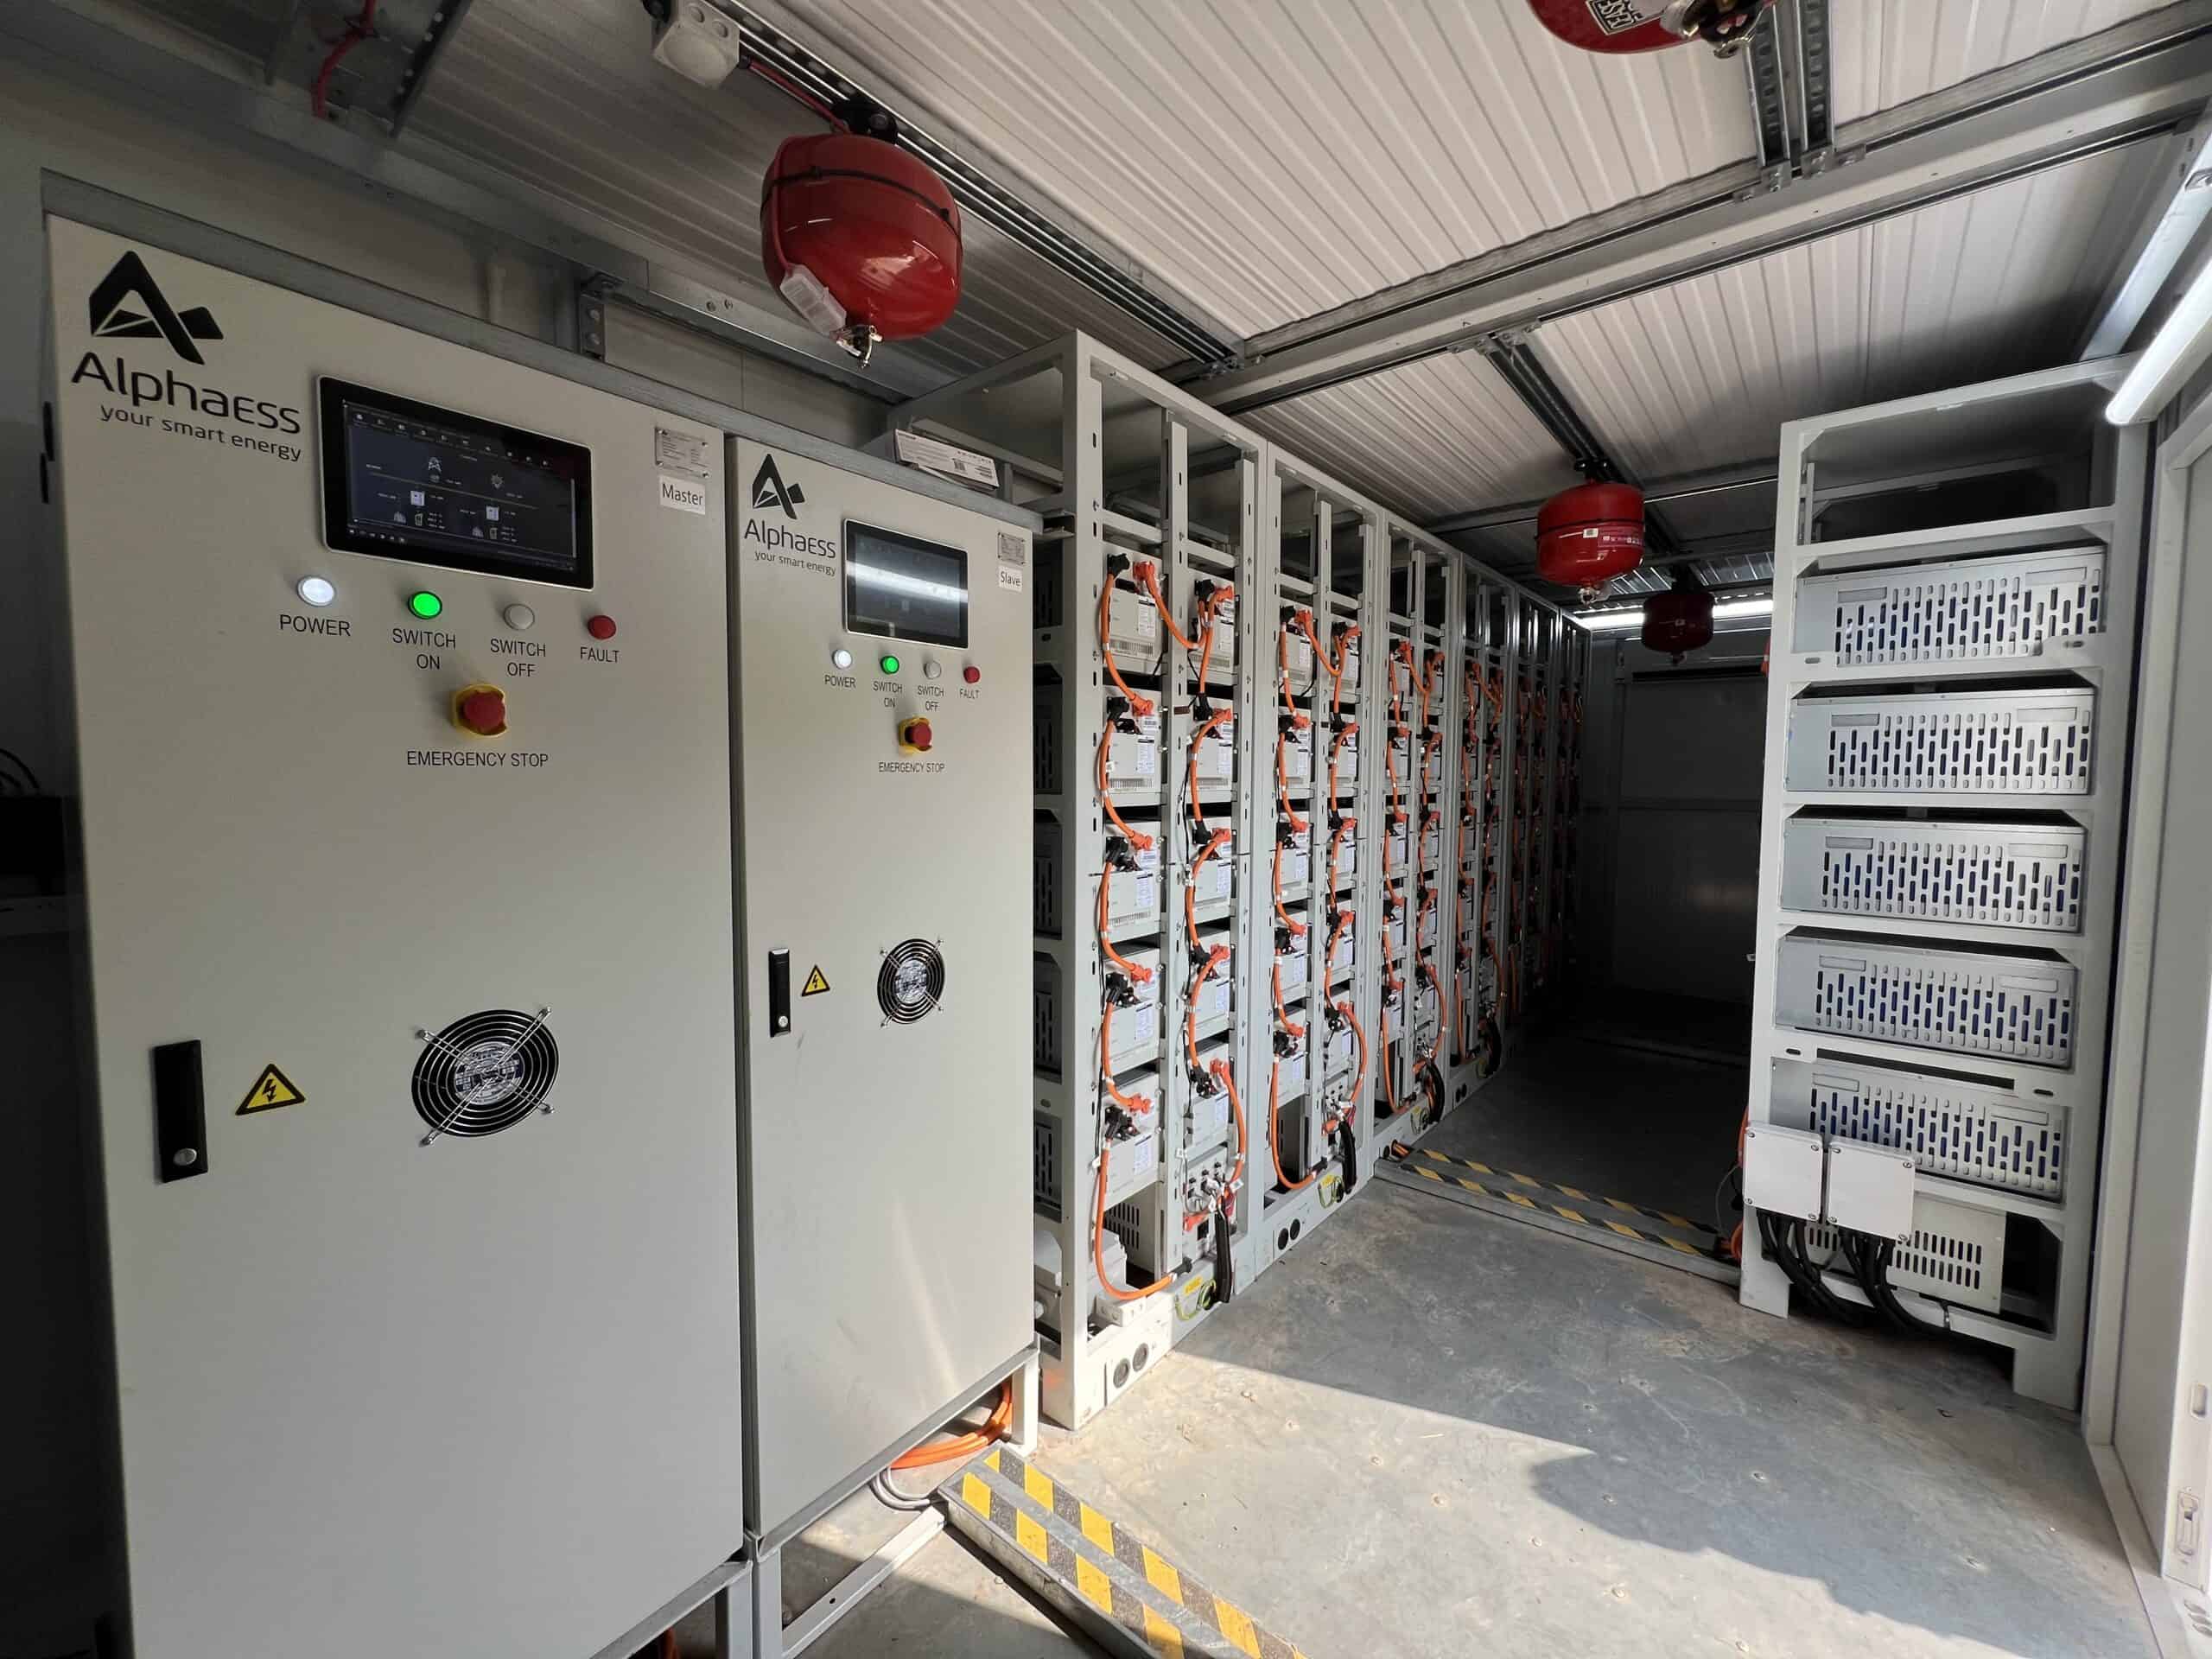 Webbs Garden Centre Containerised Battery System to pair with Ground Mount Solar System